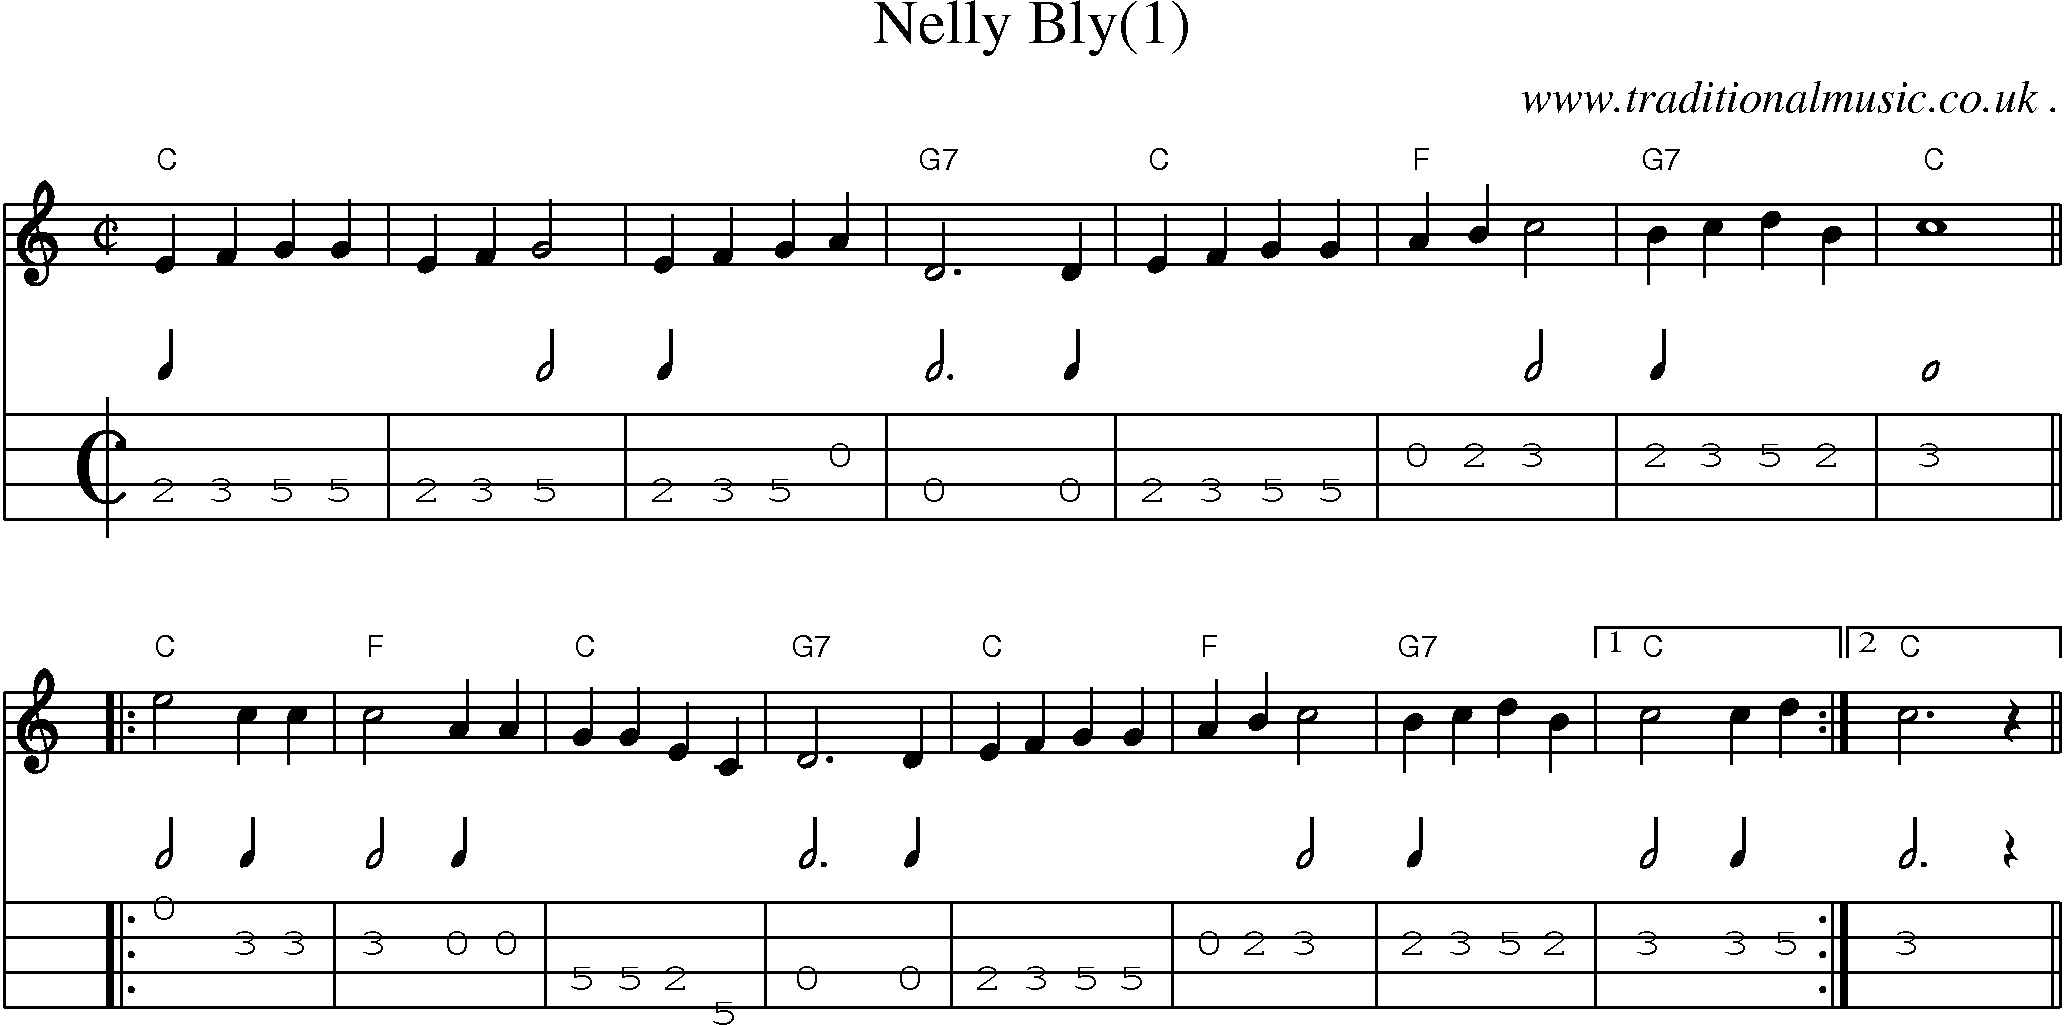 Music Score and Mandolin Tabs for Nelly Bly(1)